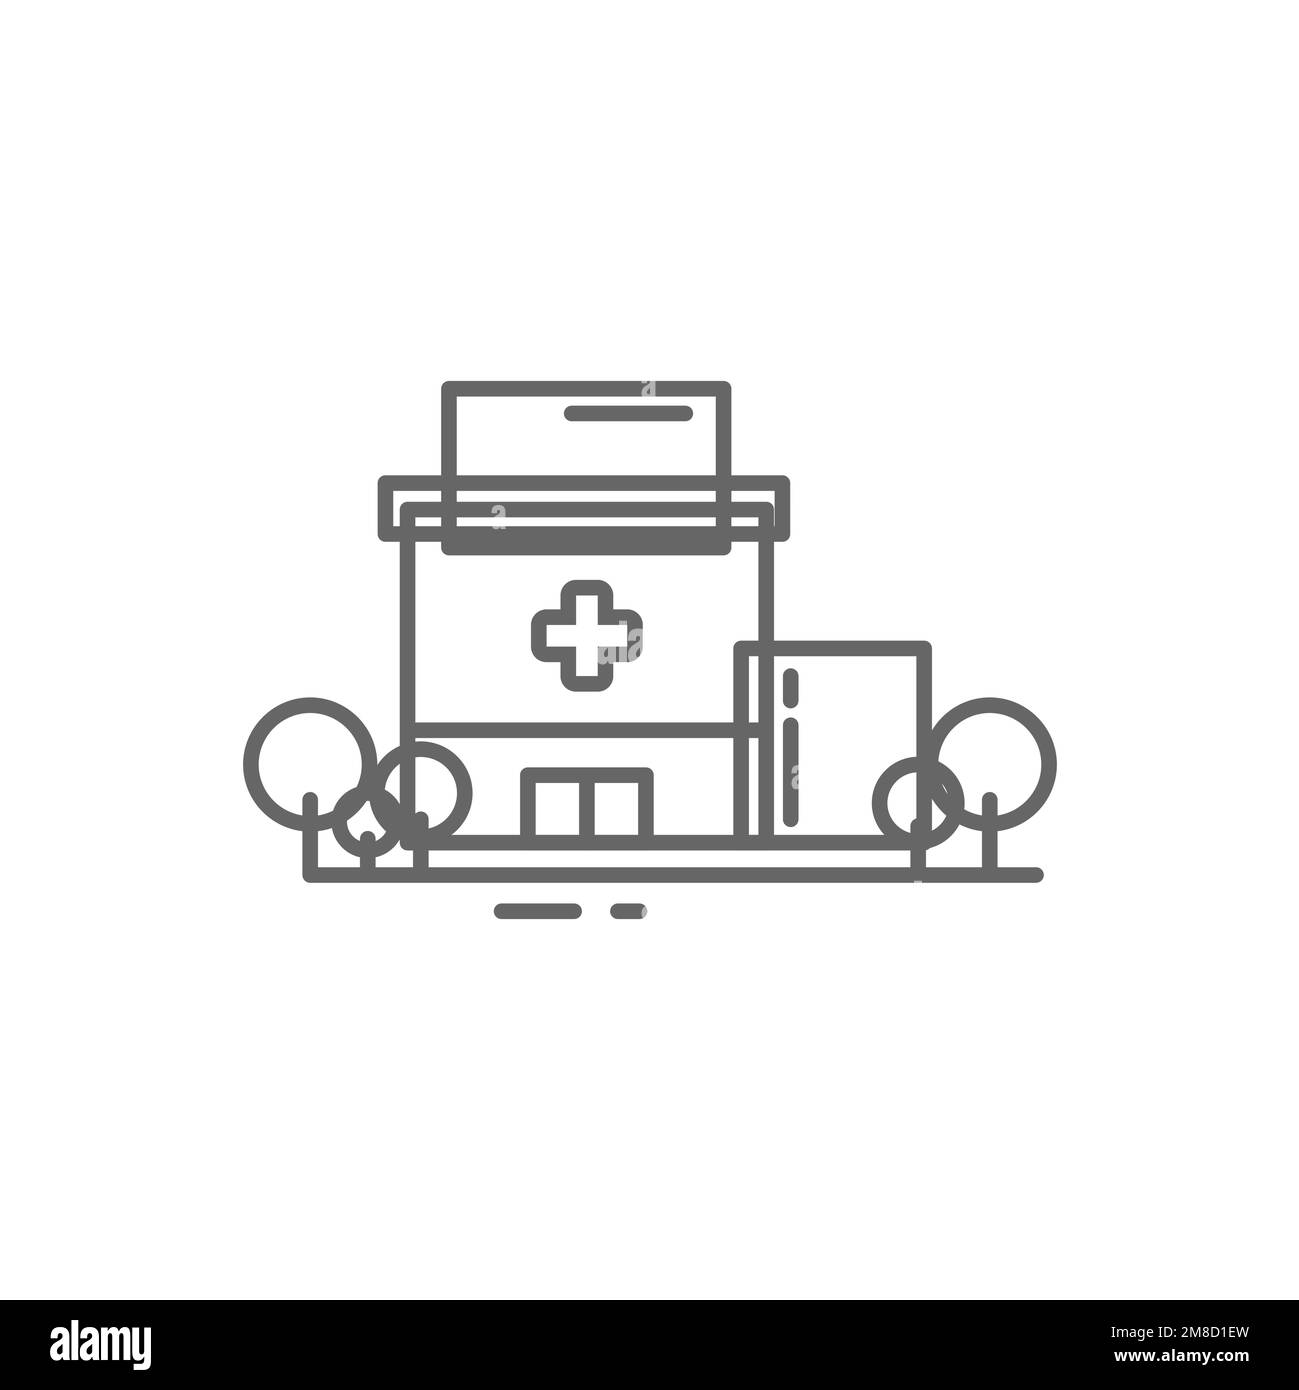 Hospital outpatient icons, common graphic resources, vector illustrations. Stock Vector